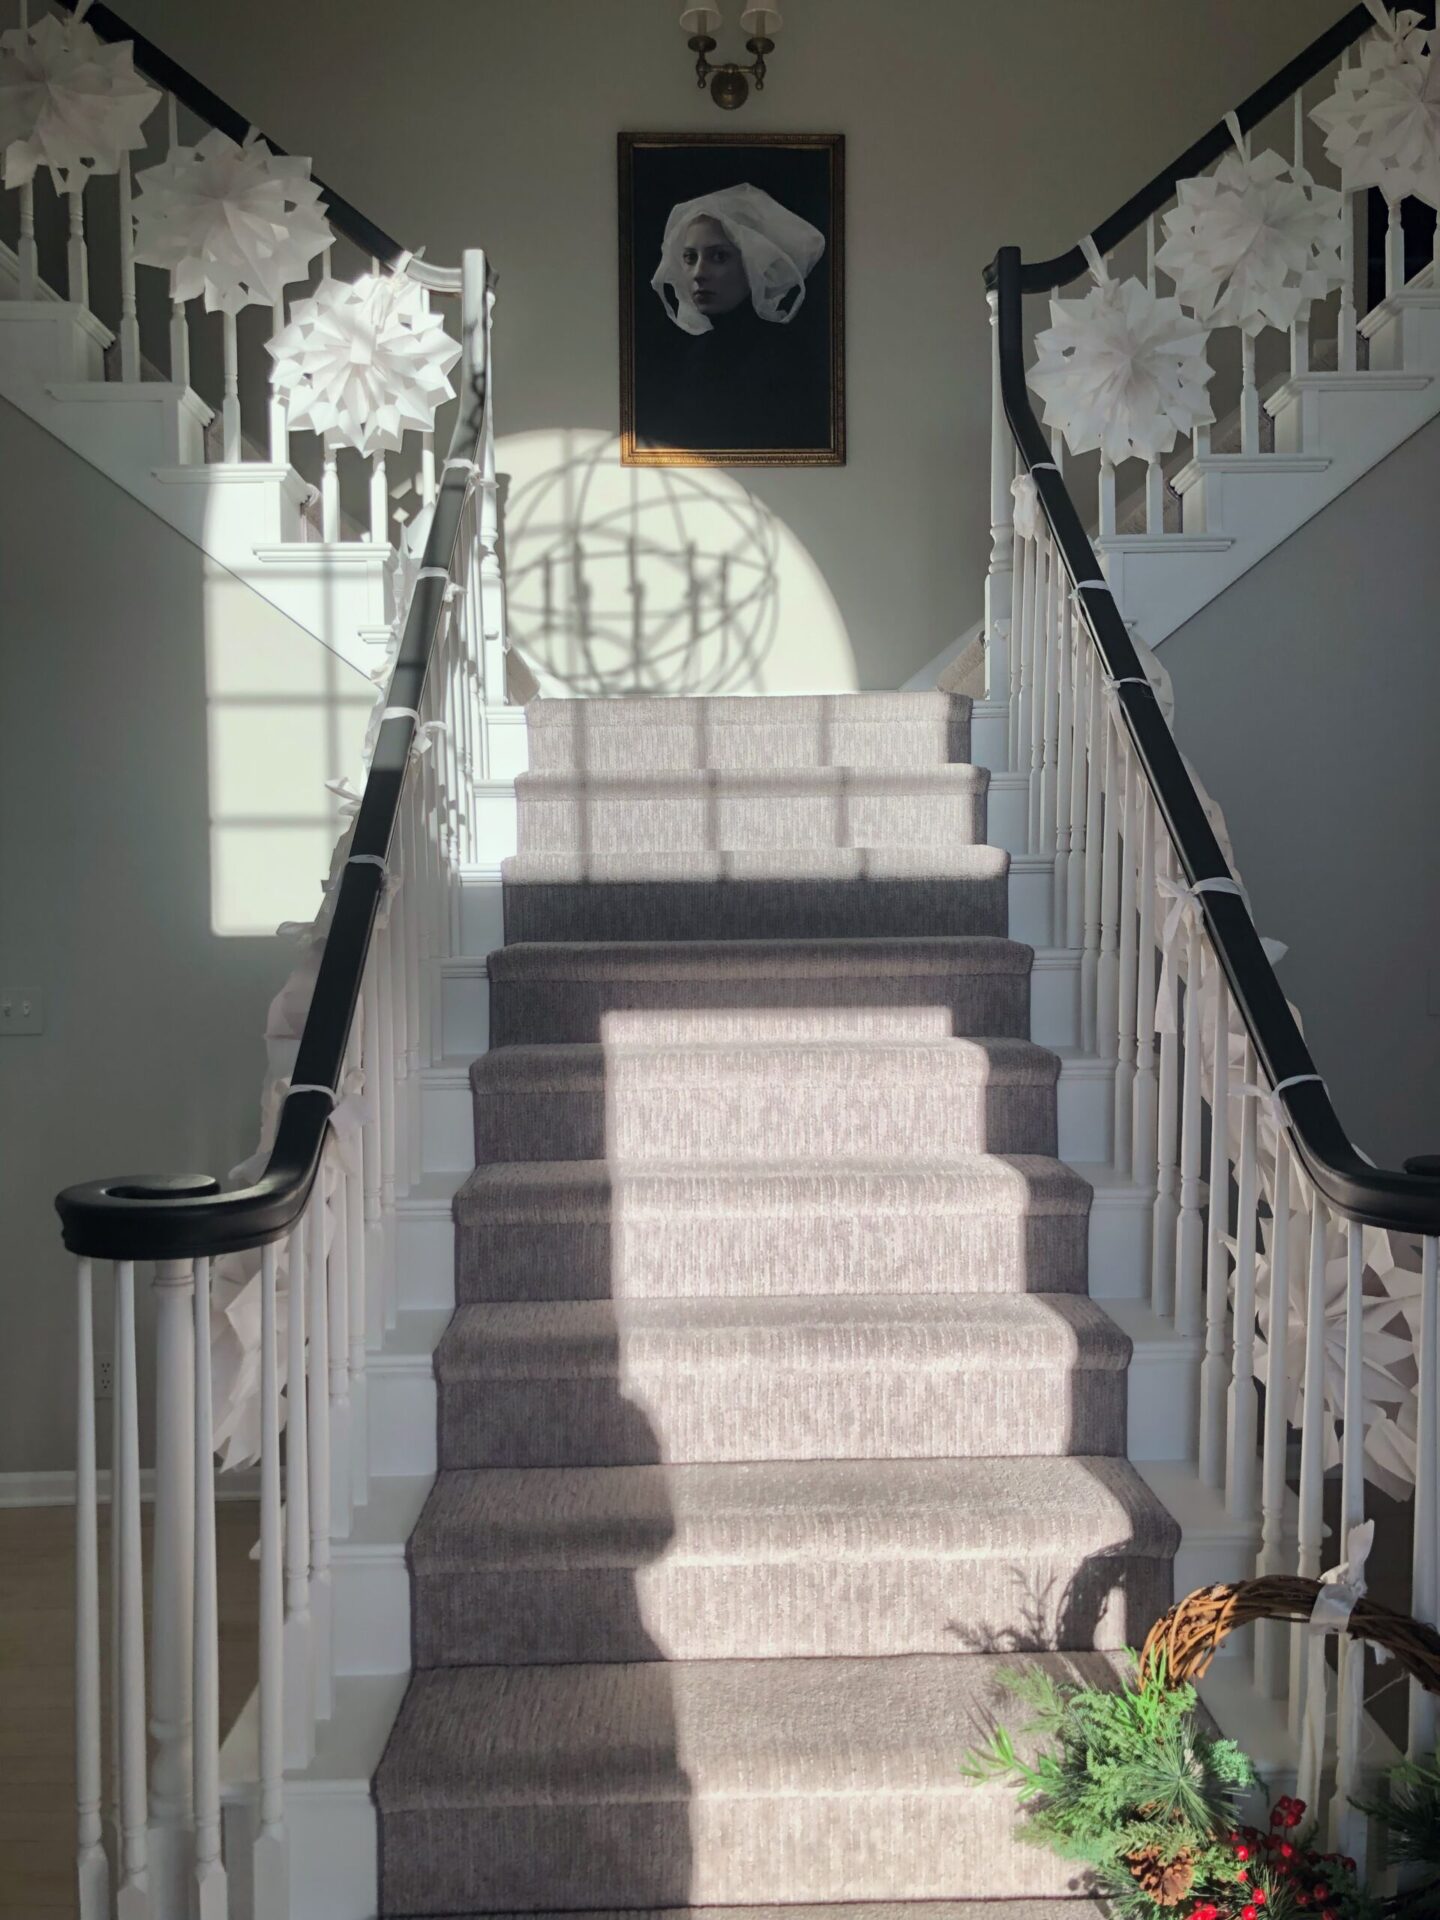 Hello Lovely's white paper bag snowflake holiday garland on fancy staircase for 2023. #snowflakegarland #papersnowflakes #paperbagsnowflakes